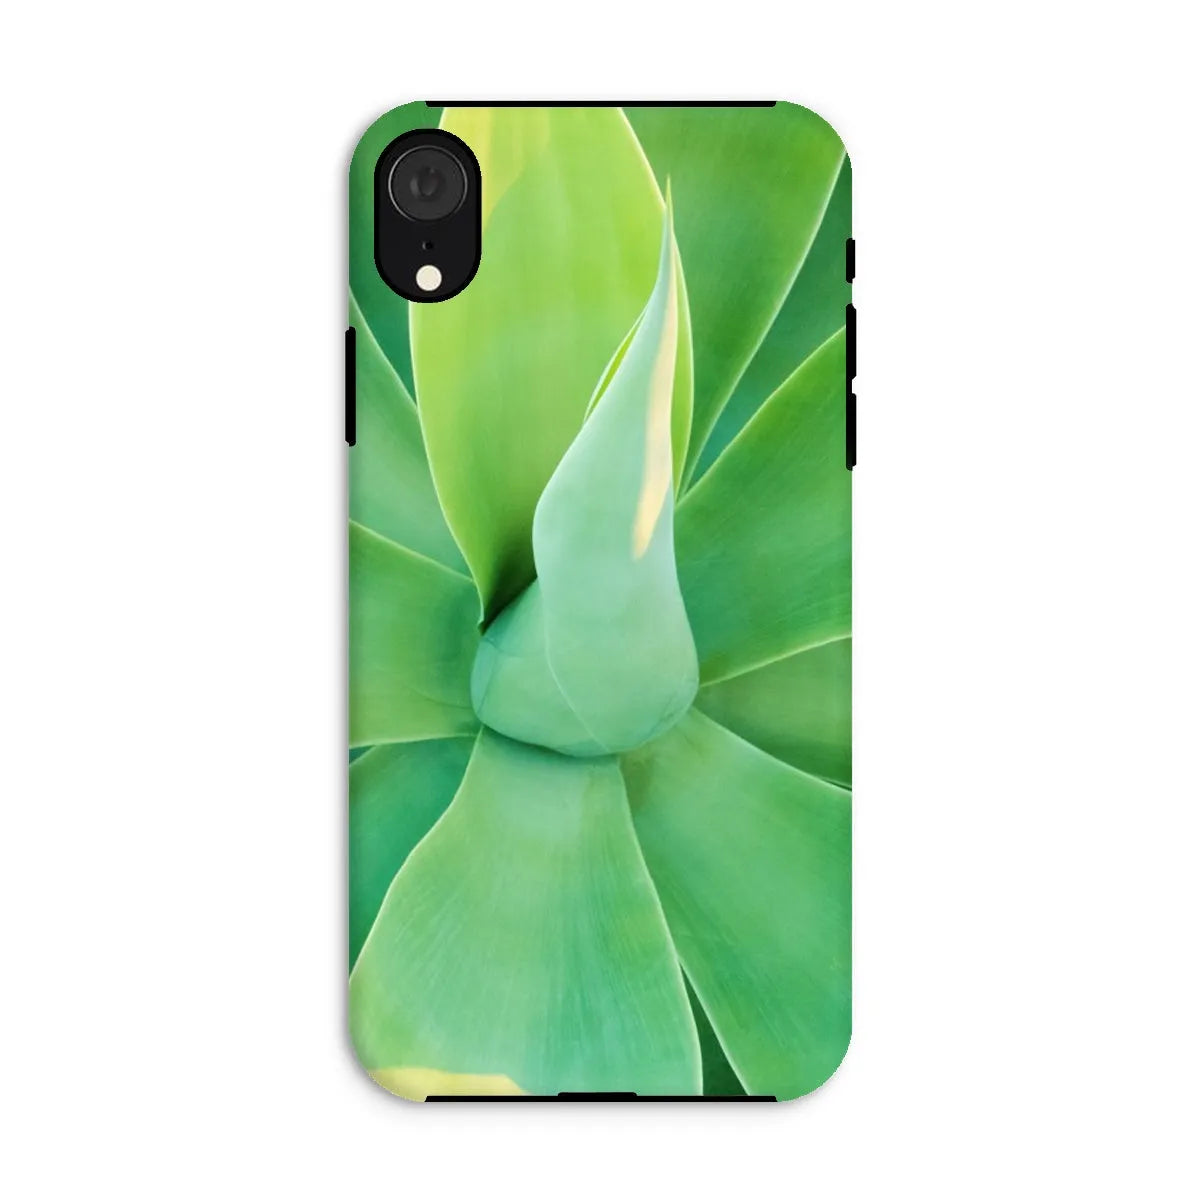 In Bloom Too Tough Phone Case - Iphone Xr / Matte - Mobile Phone Cases - Aesthetic Art